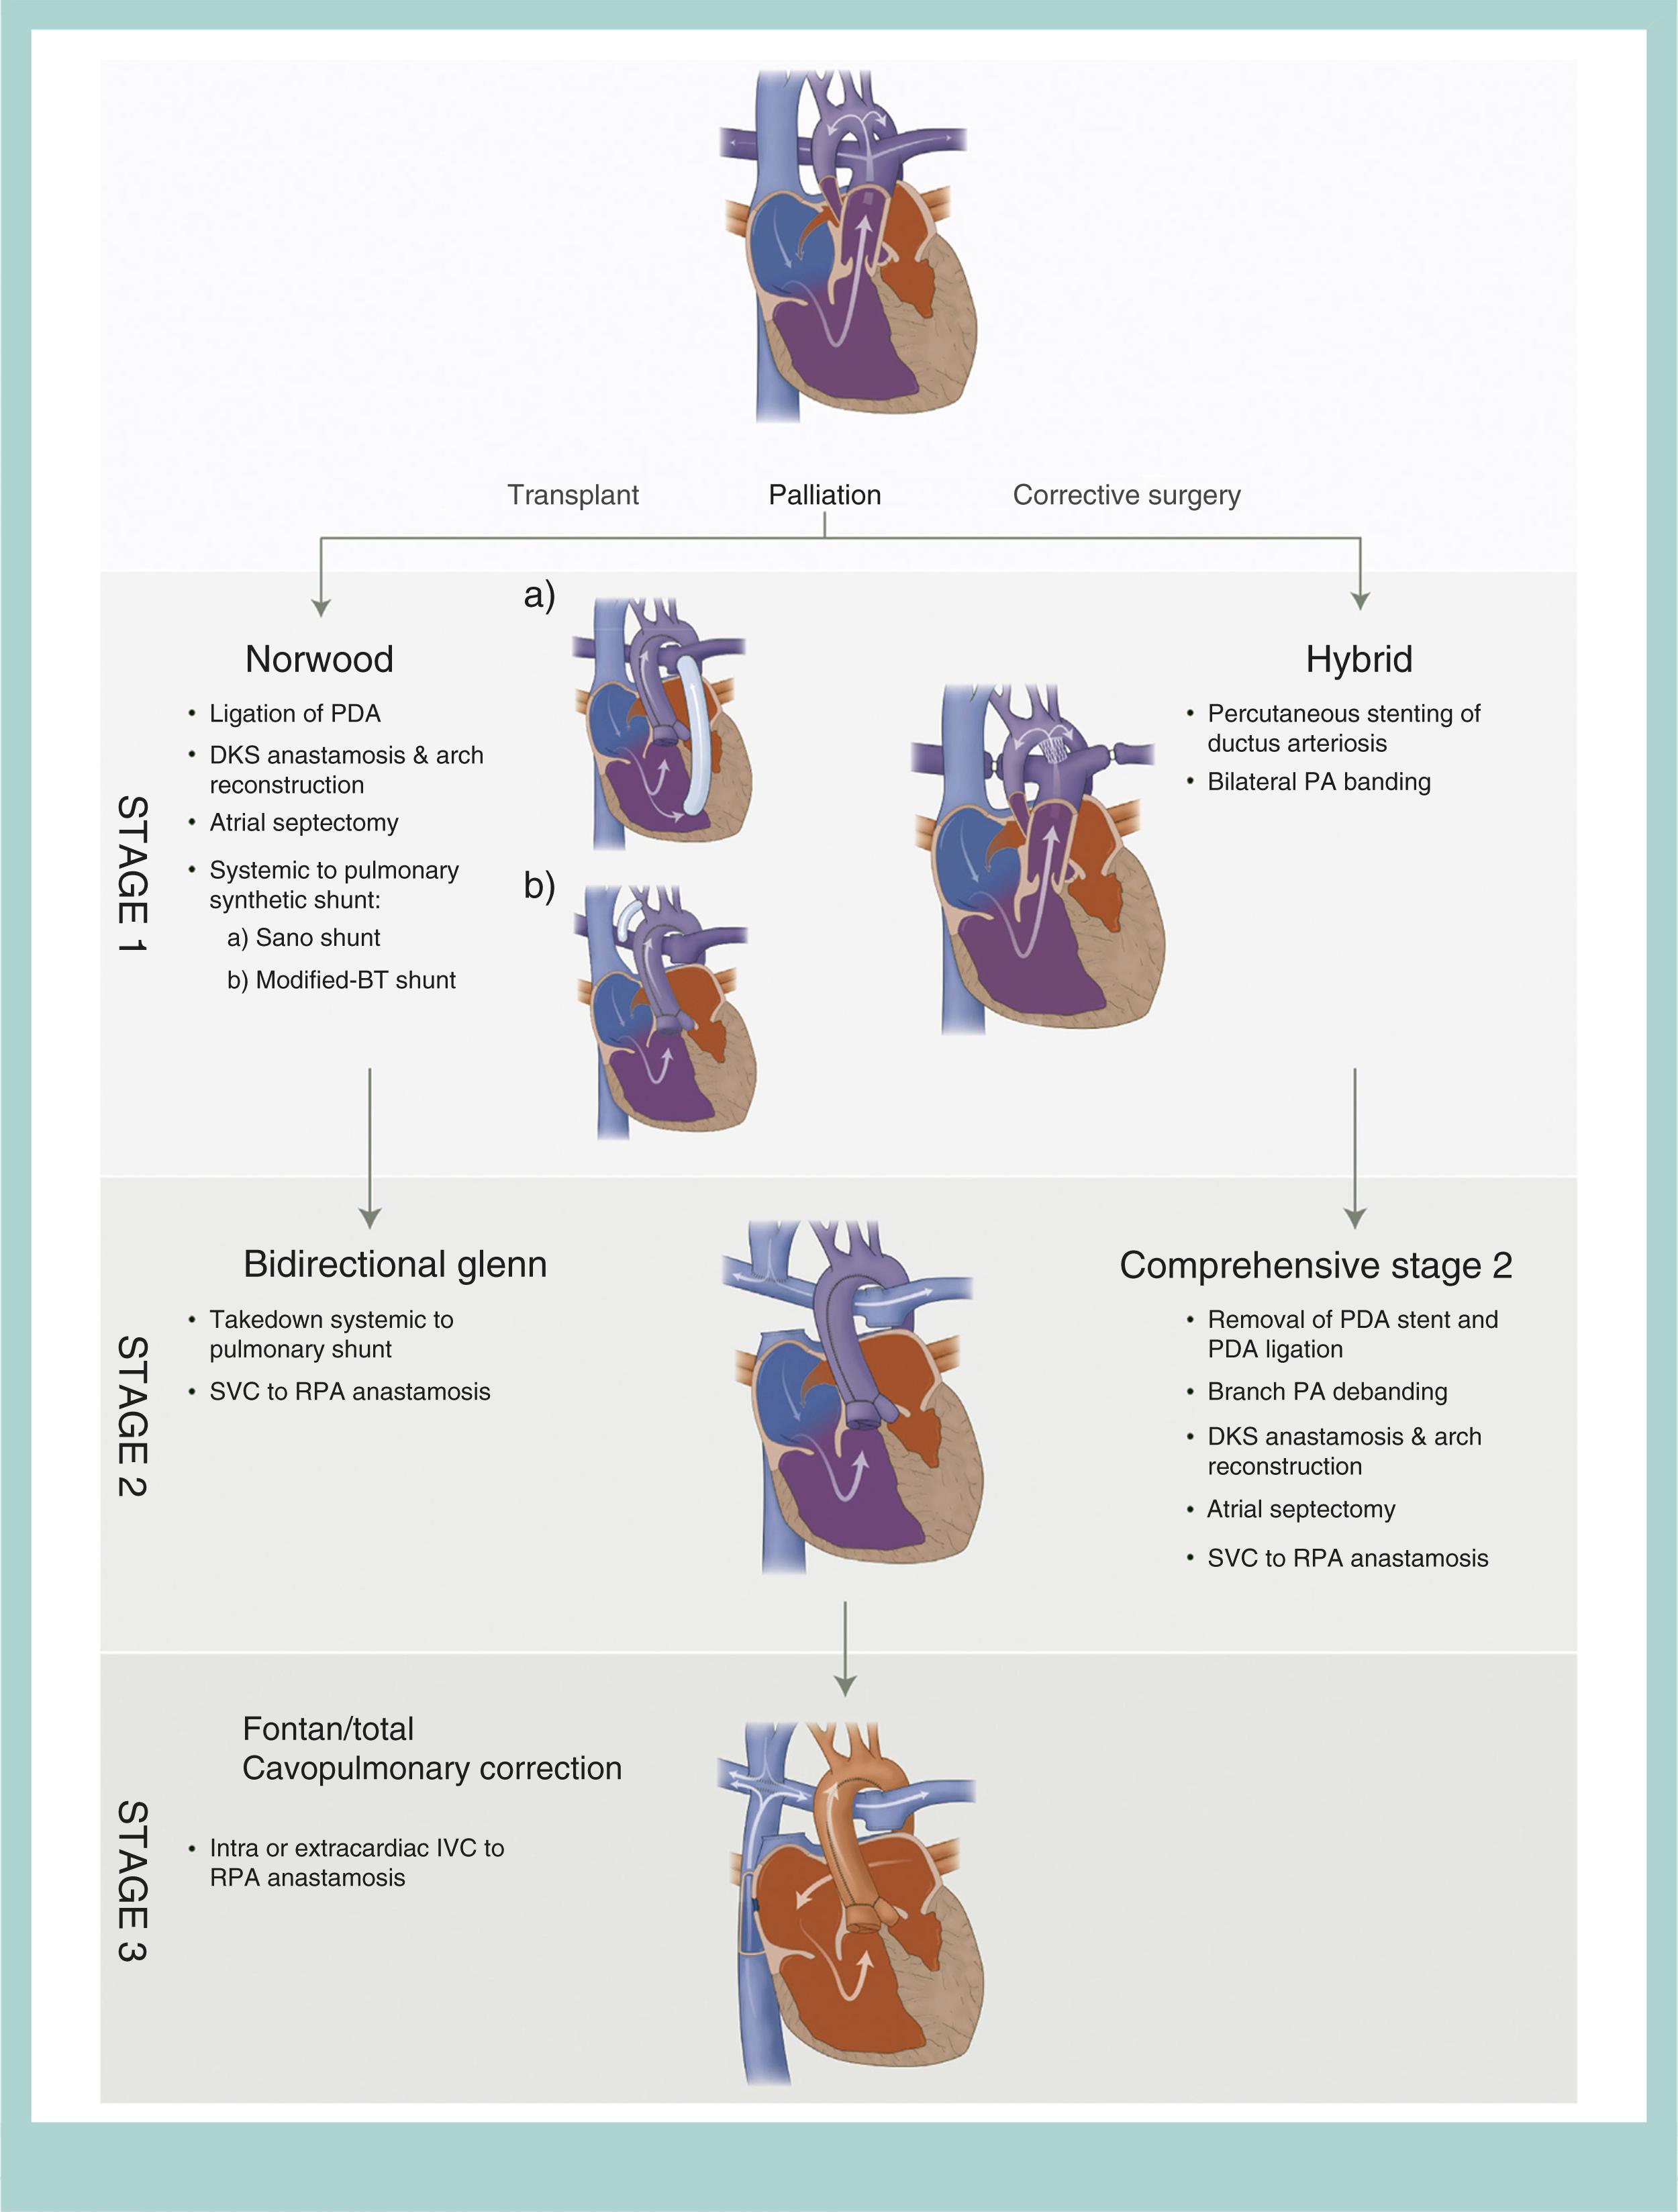 Figure 16.4, Depiction of the various pathways used to palliate hypoplastic left heart syndrome (HLHS) to a Fontan circulation. BT , Blalock-Taussig; DKS , Damus-Kaye-Stansel; IVC , inferior vena cava; PA , pulmonary artery; PDA , patent ductus arteriosus; RPA , right pulmonary artery; SVC , superior vena cava.